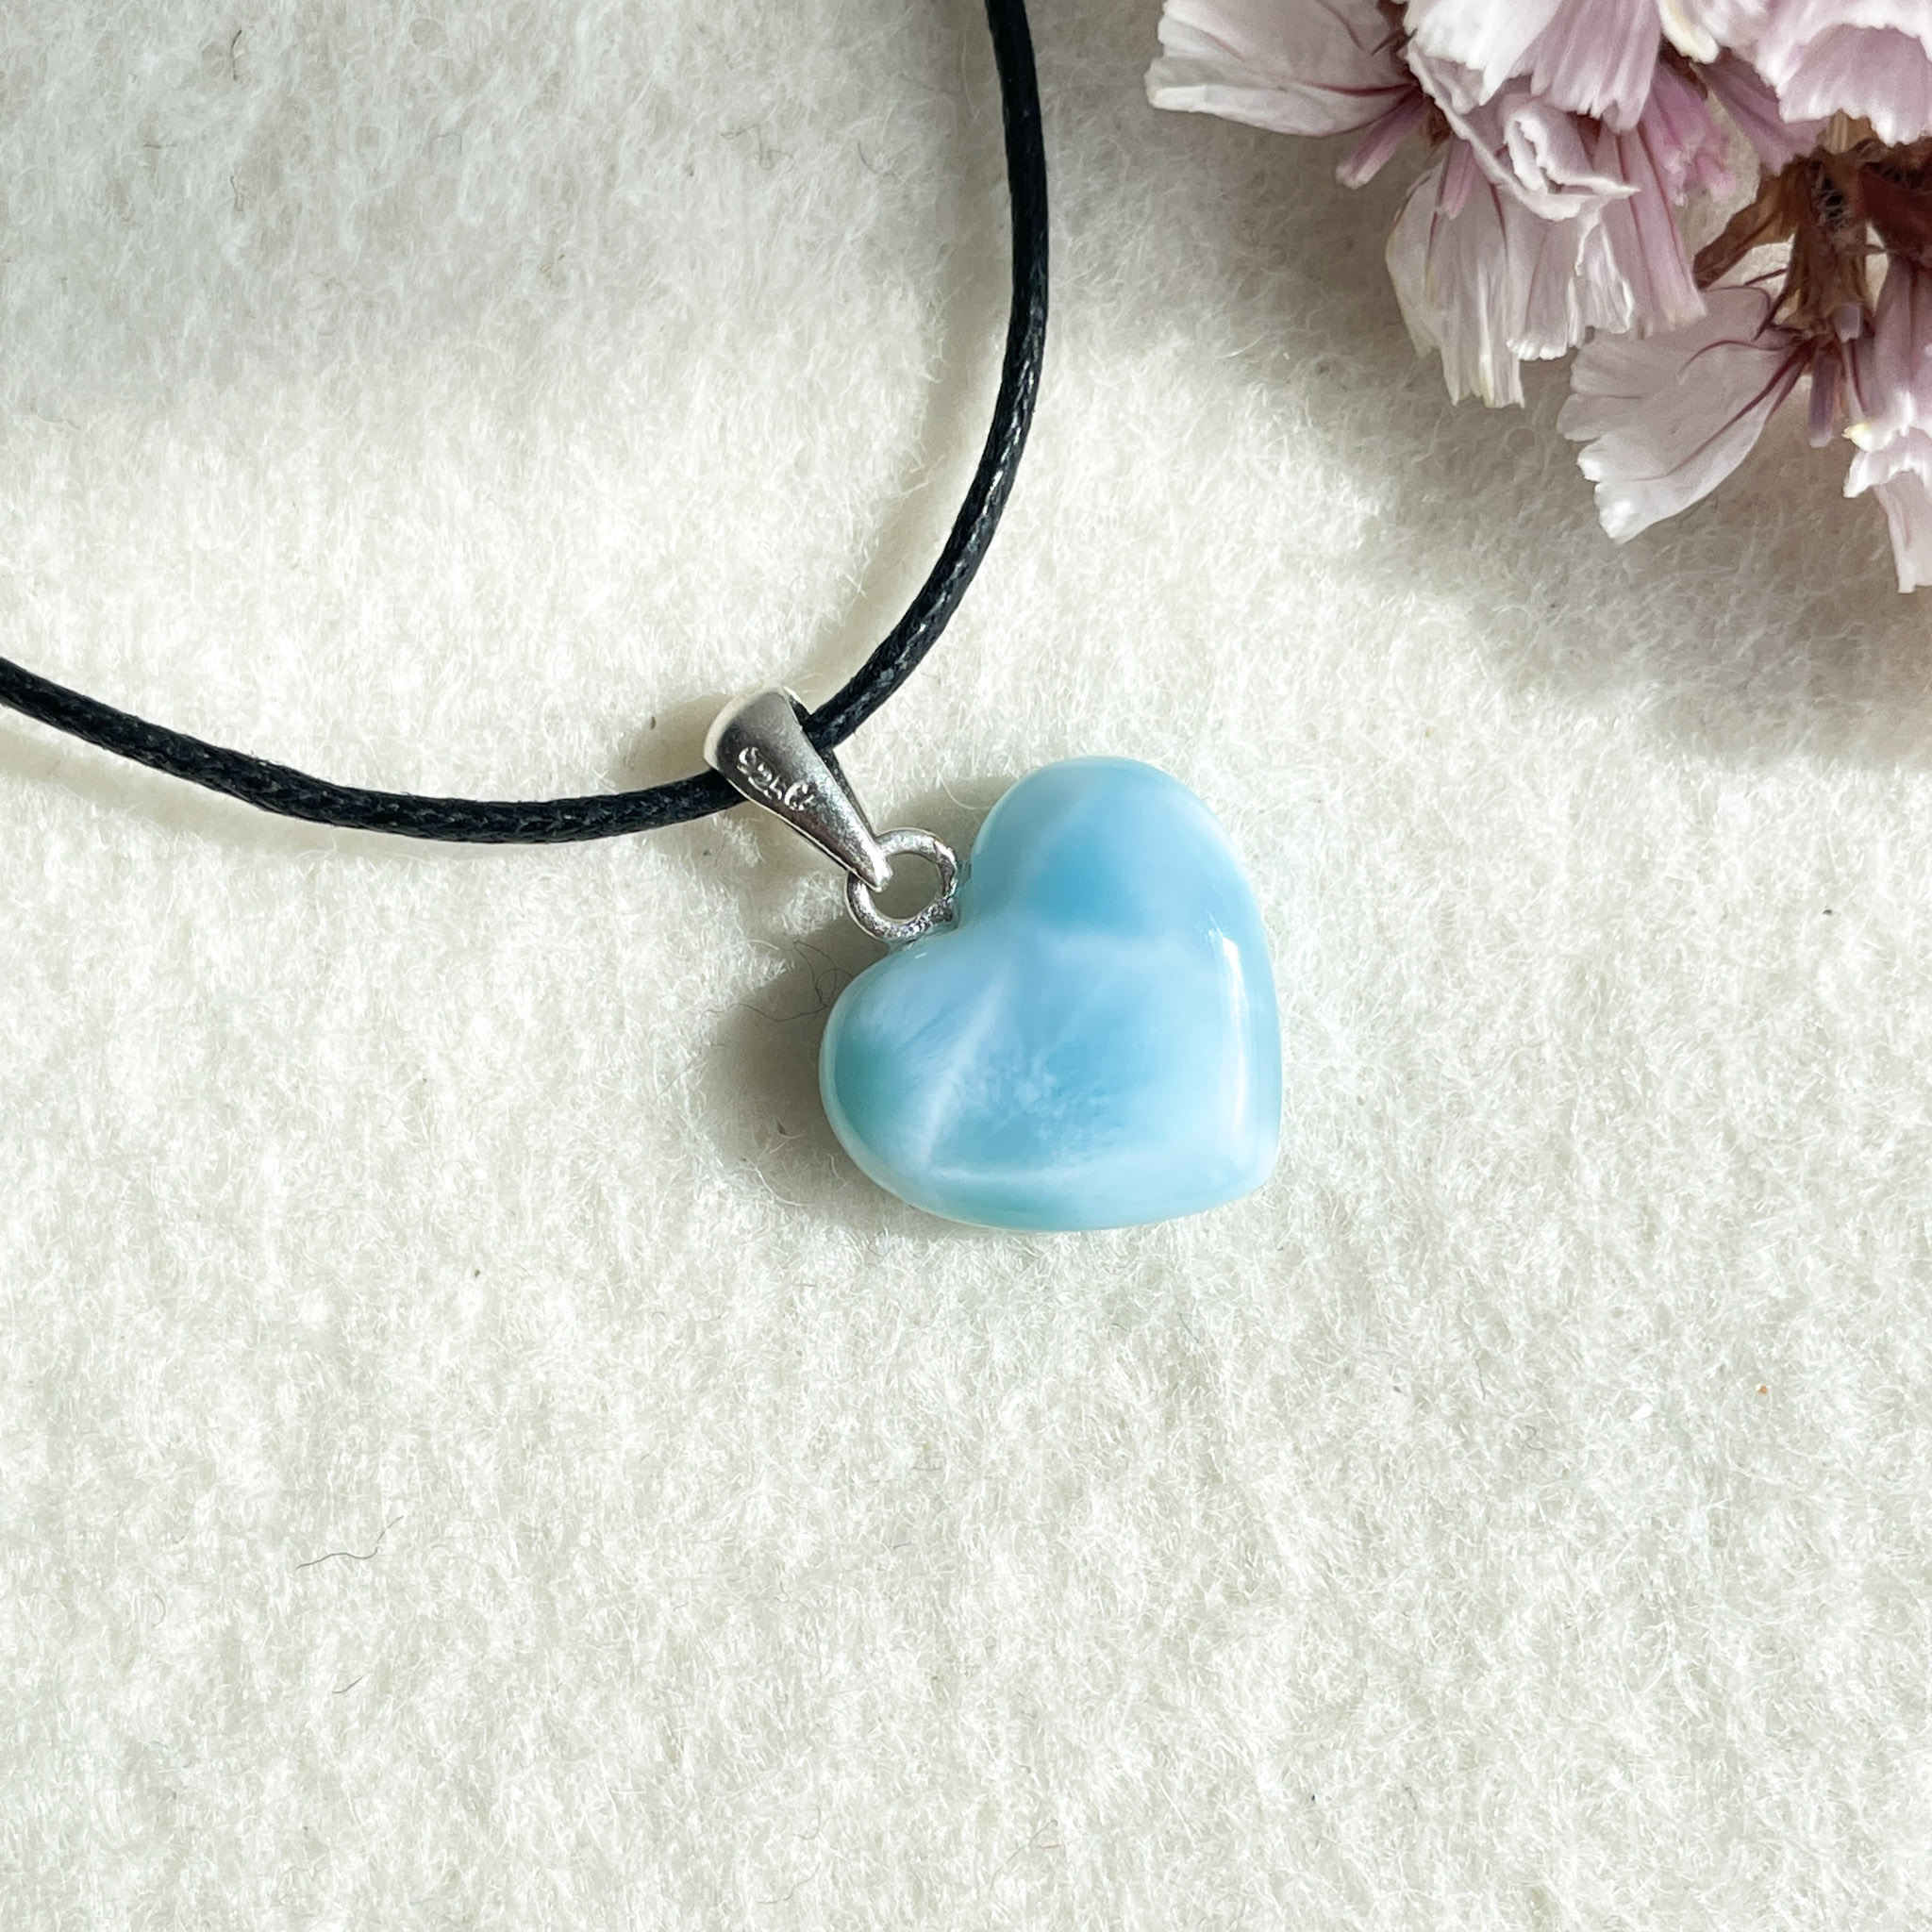 A light blue heart-shaped pendant on a black cord necklace, lying on a white textured background next to pink flowers.